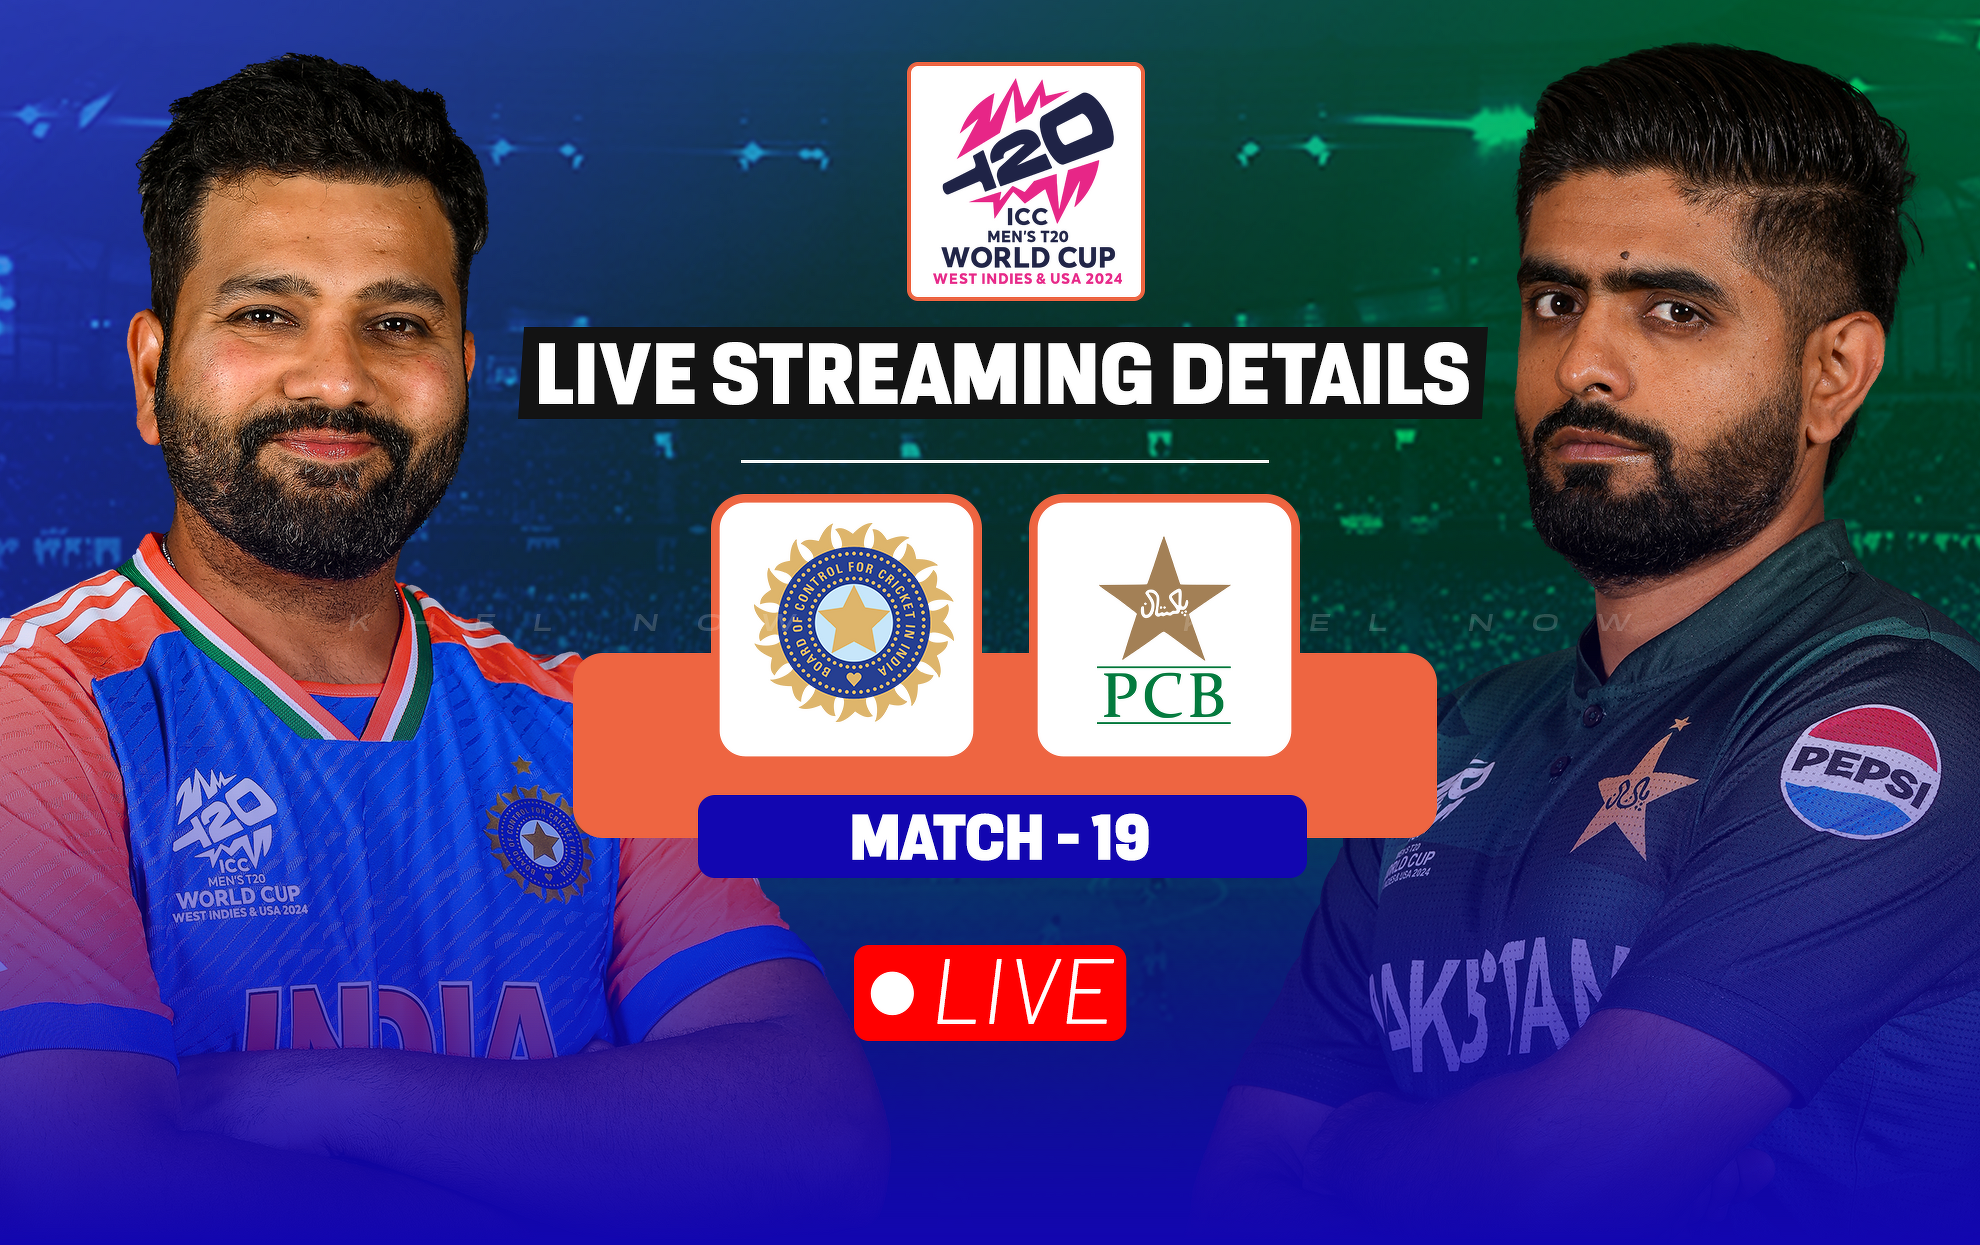 IND vs PAK Live streaming details, when and where to watch match 19 of